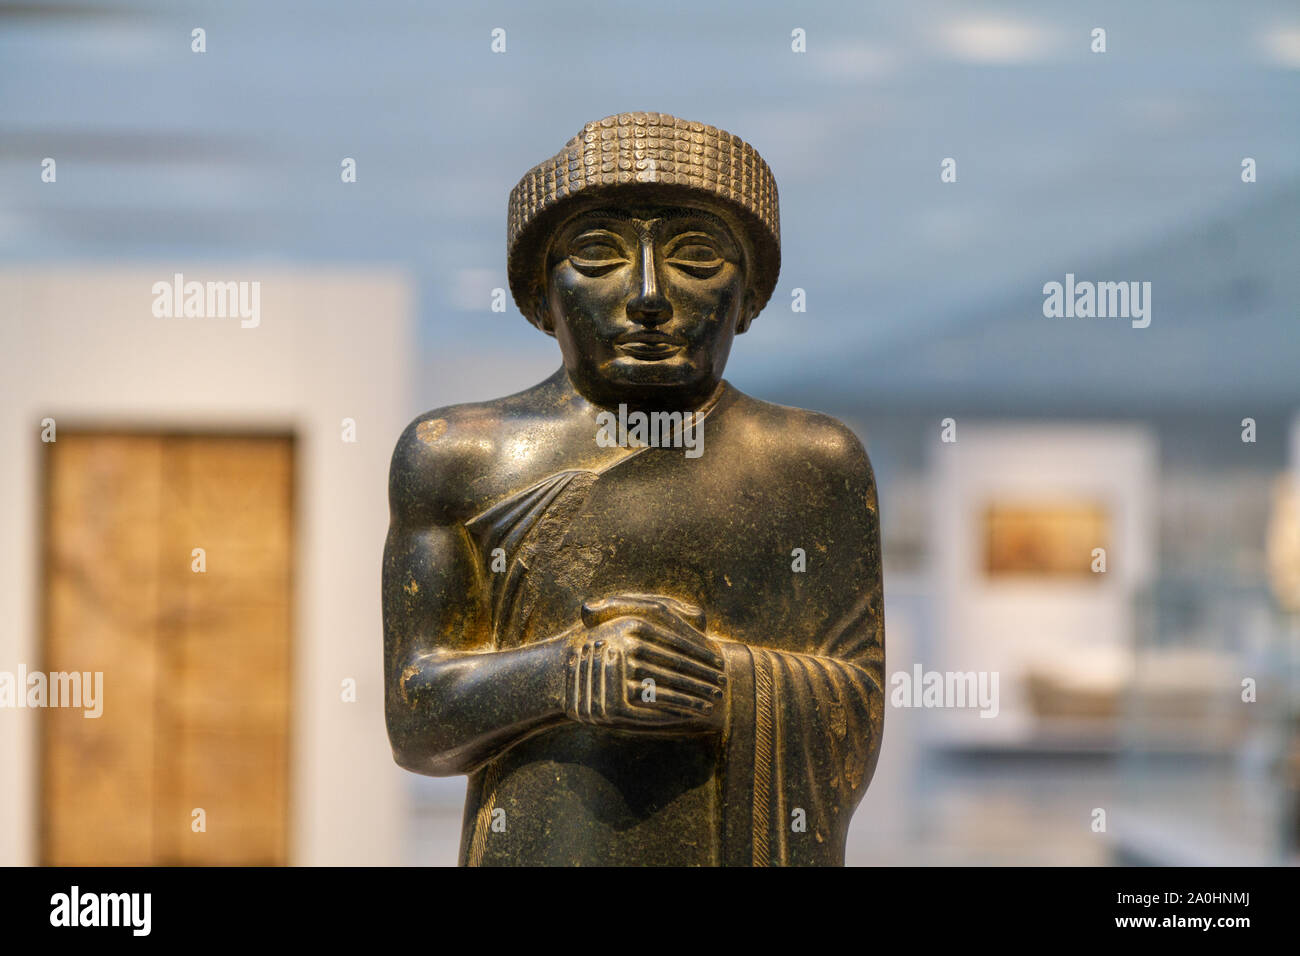 Diorite statue of Gudea, the ruler of the state Lagash. Artifact found in Girsu (today's Tello) in Mesopotamia (today's Iraq). About 2120BC. Stock Photo